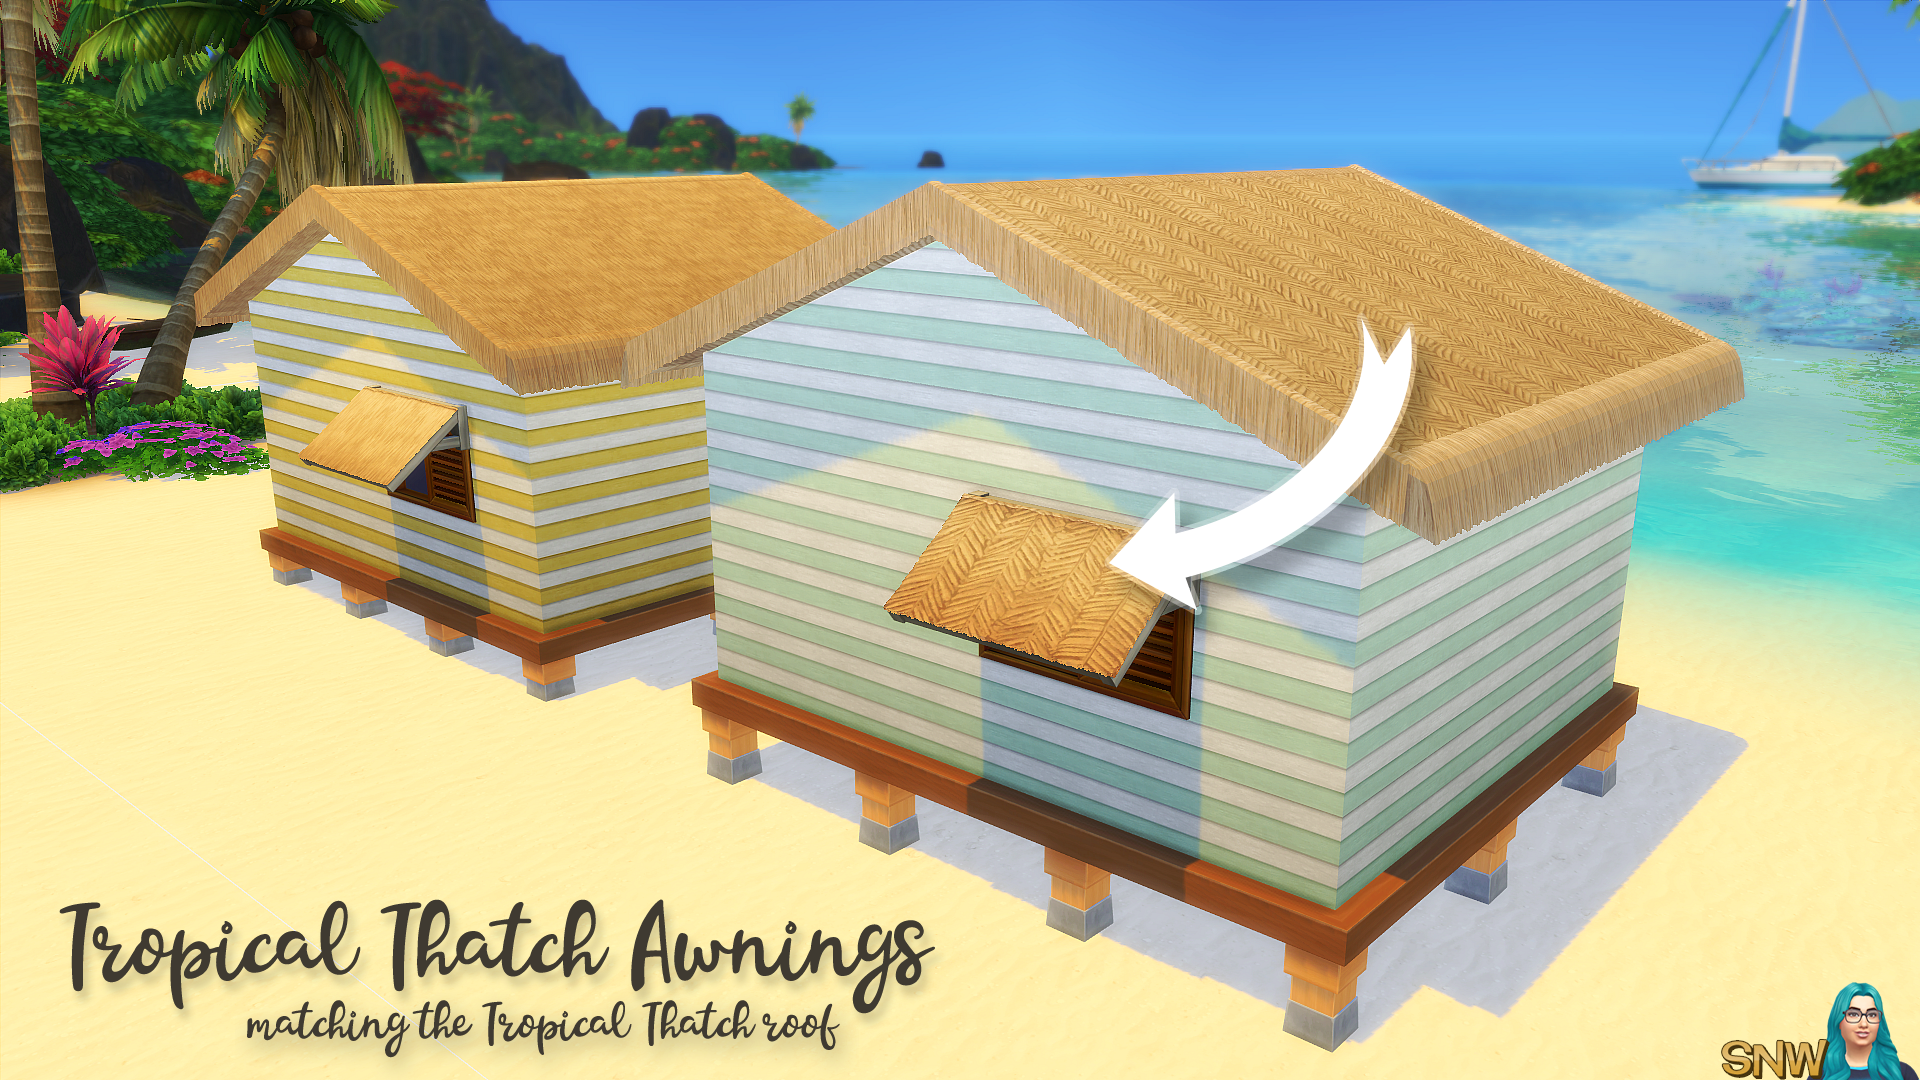 Tropical Thatch Awnings - matches Tropical Thatch roof from Island Living